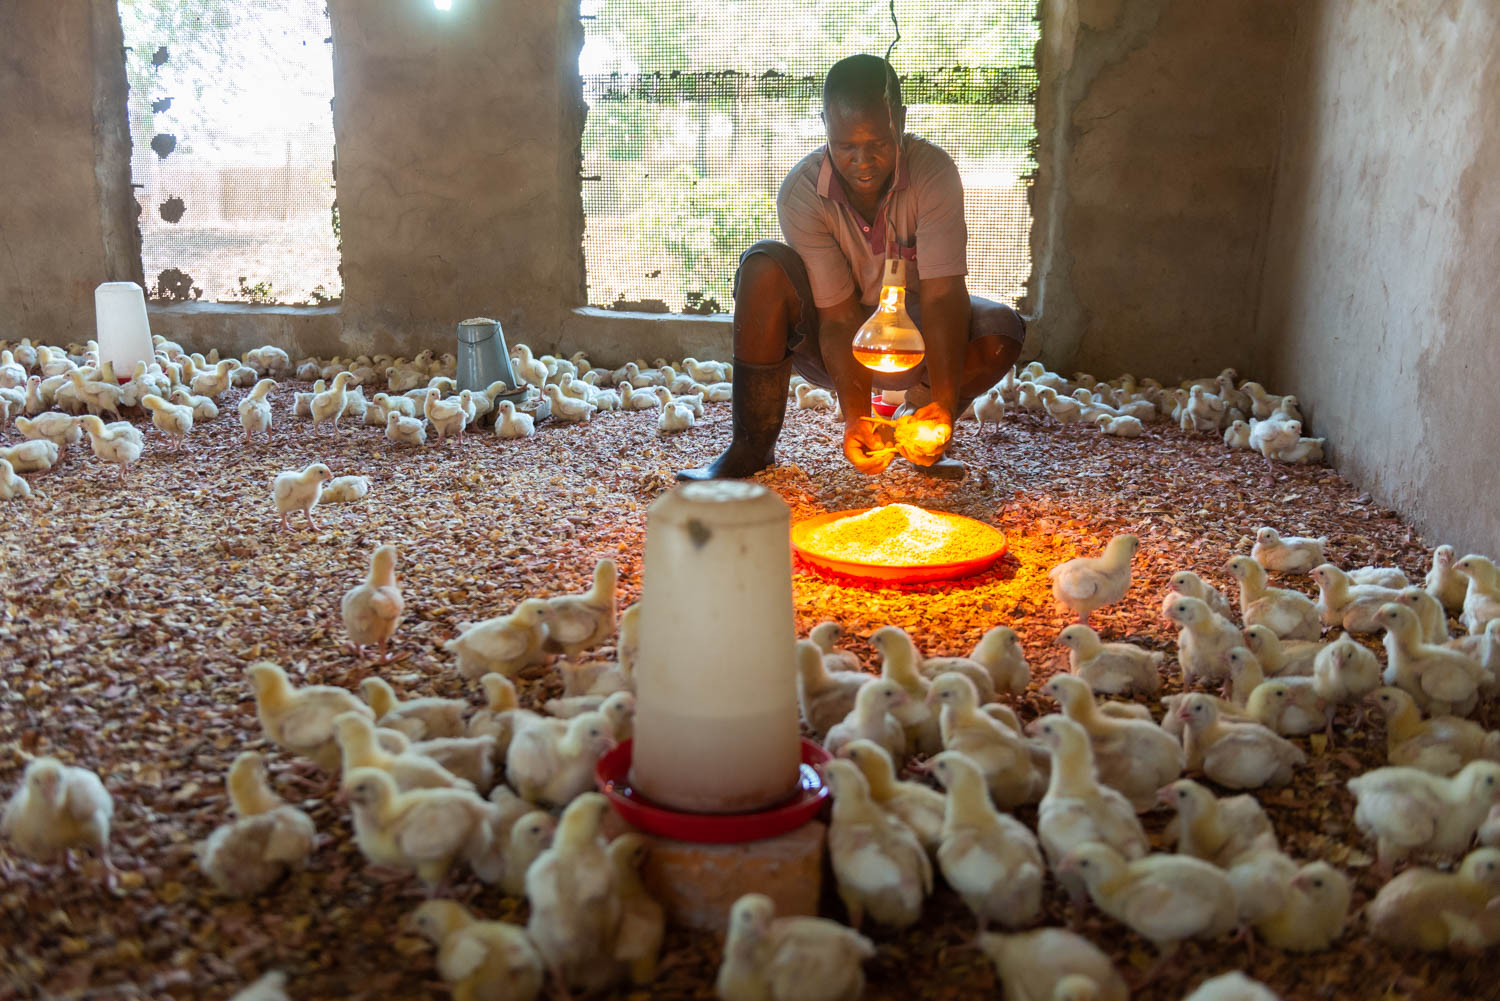 Farmer cleaning a chicken